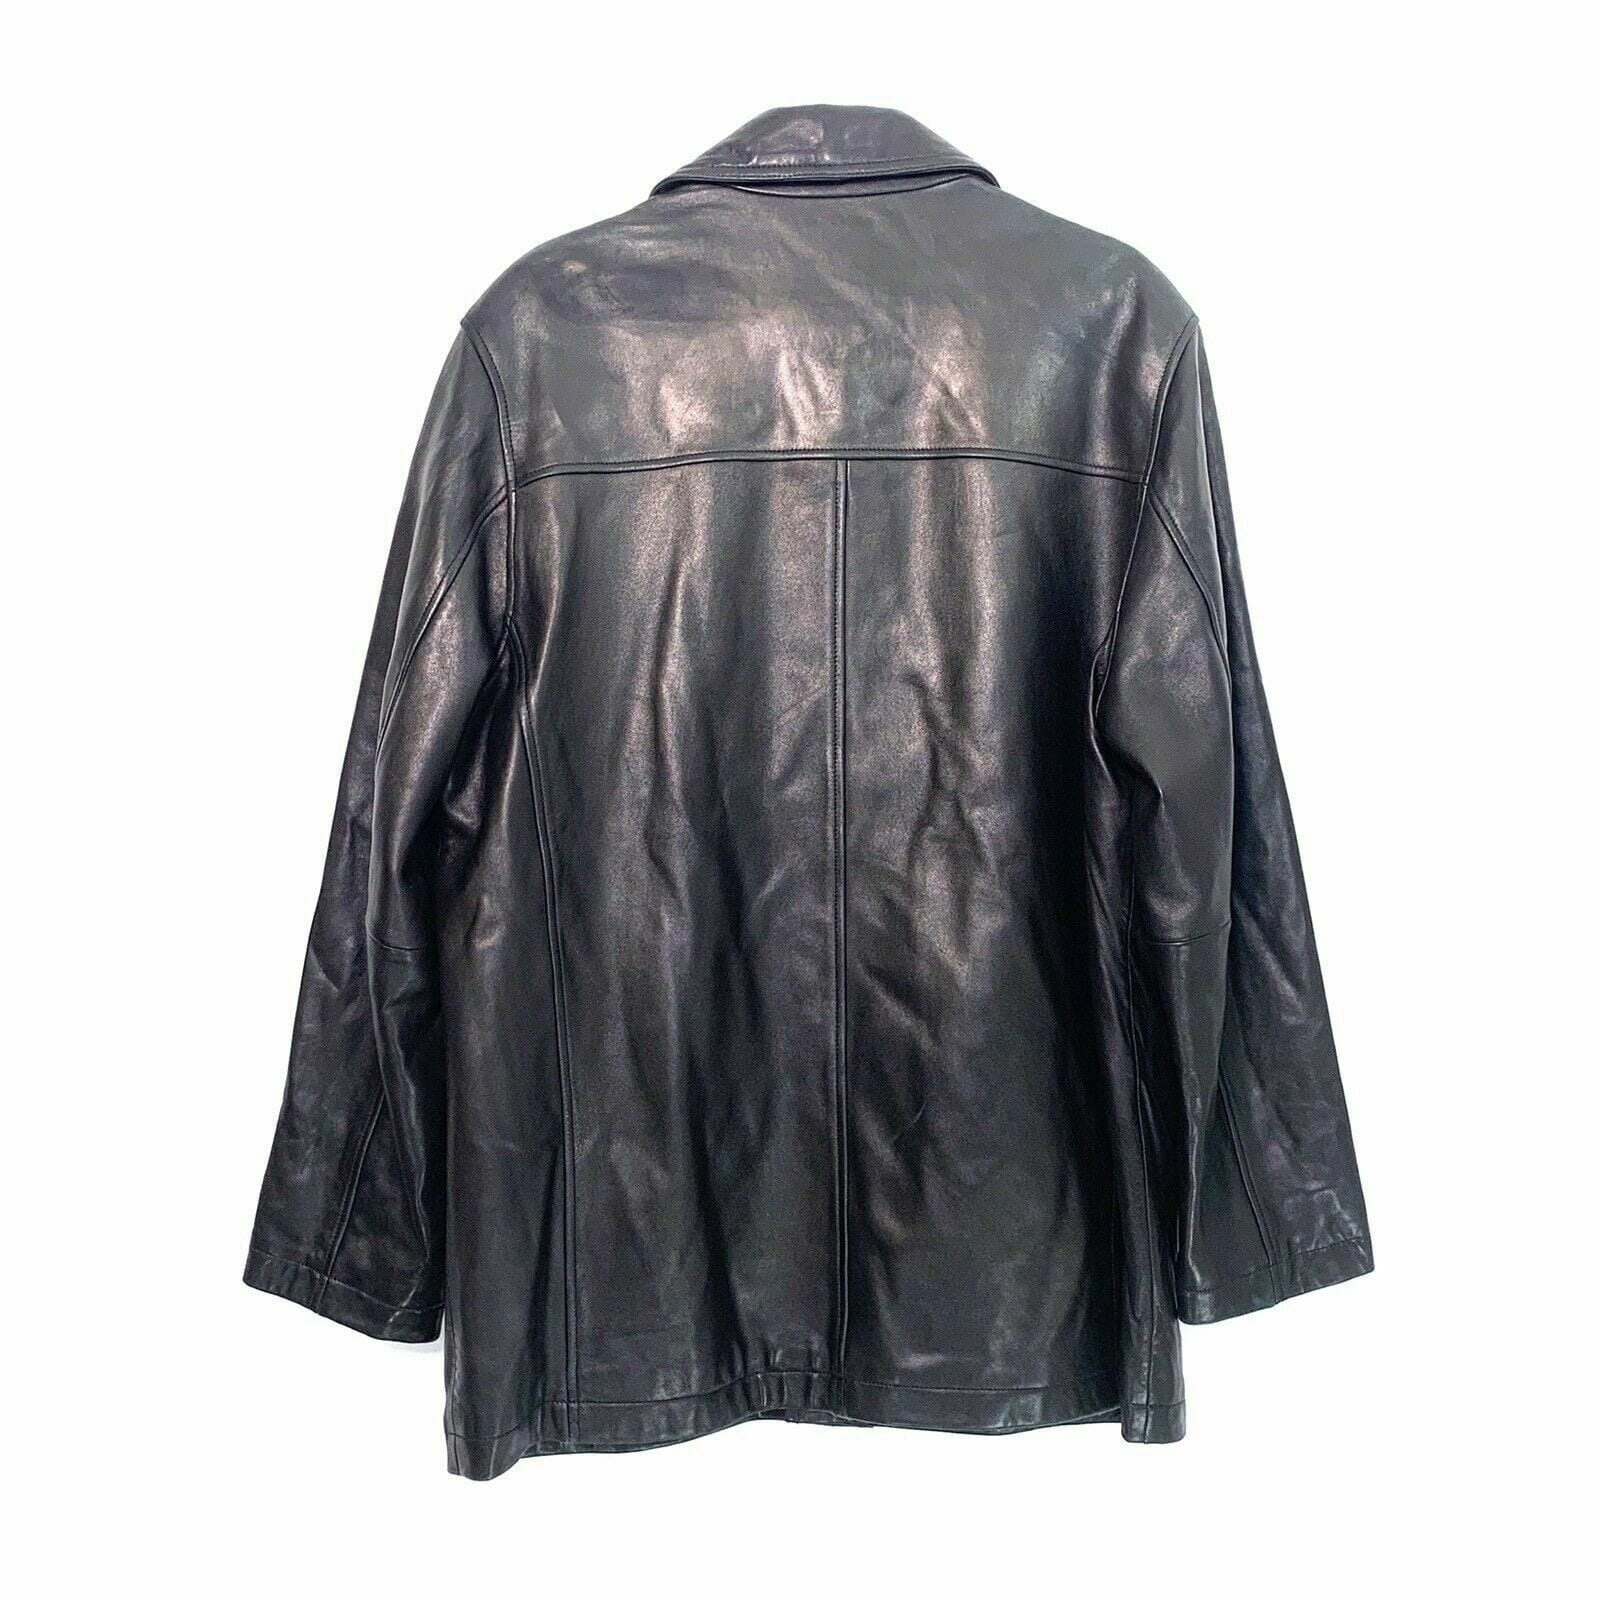 Reilly Olmes Collection Mens Lined Butter Soft Leather Jacket, Black - Size L - parsimonyshoppes